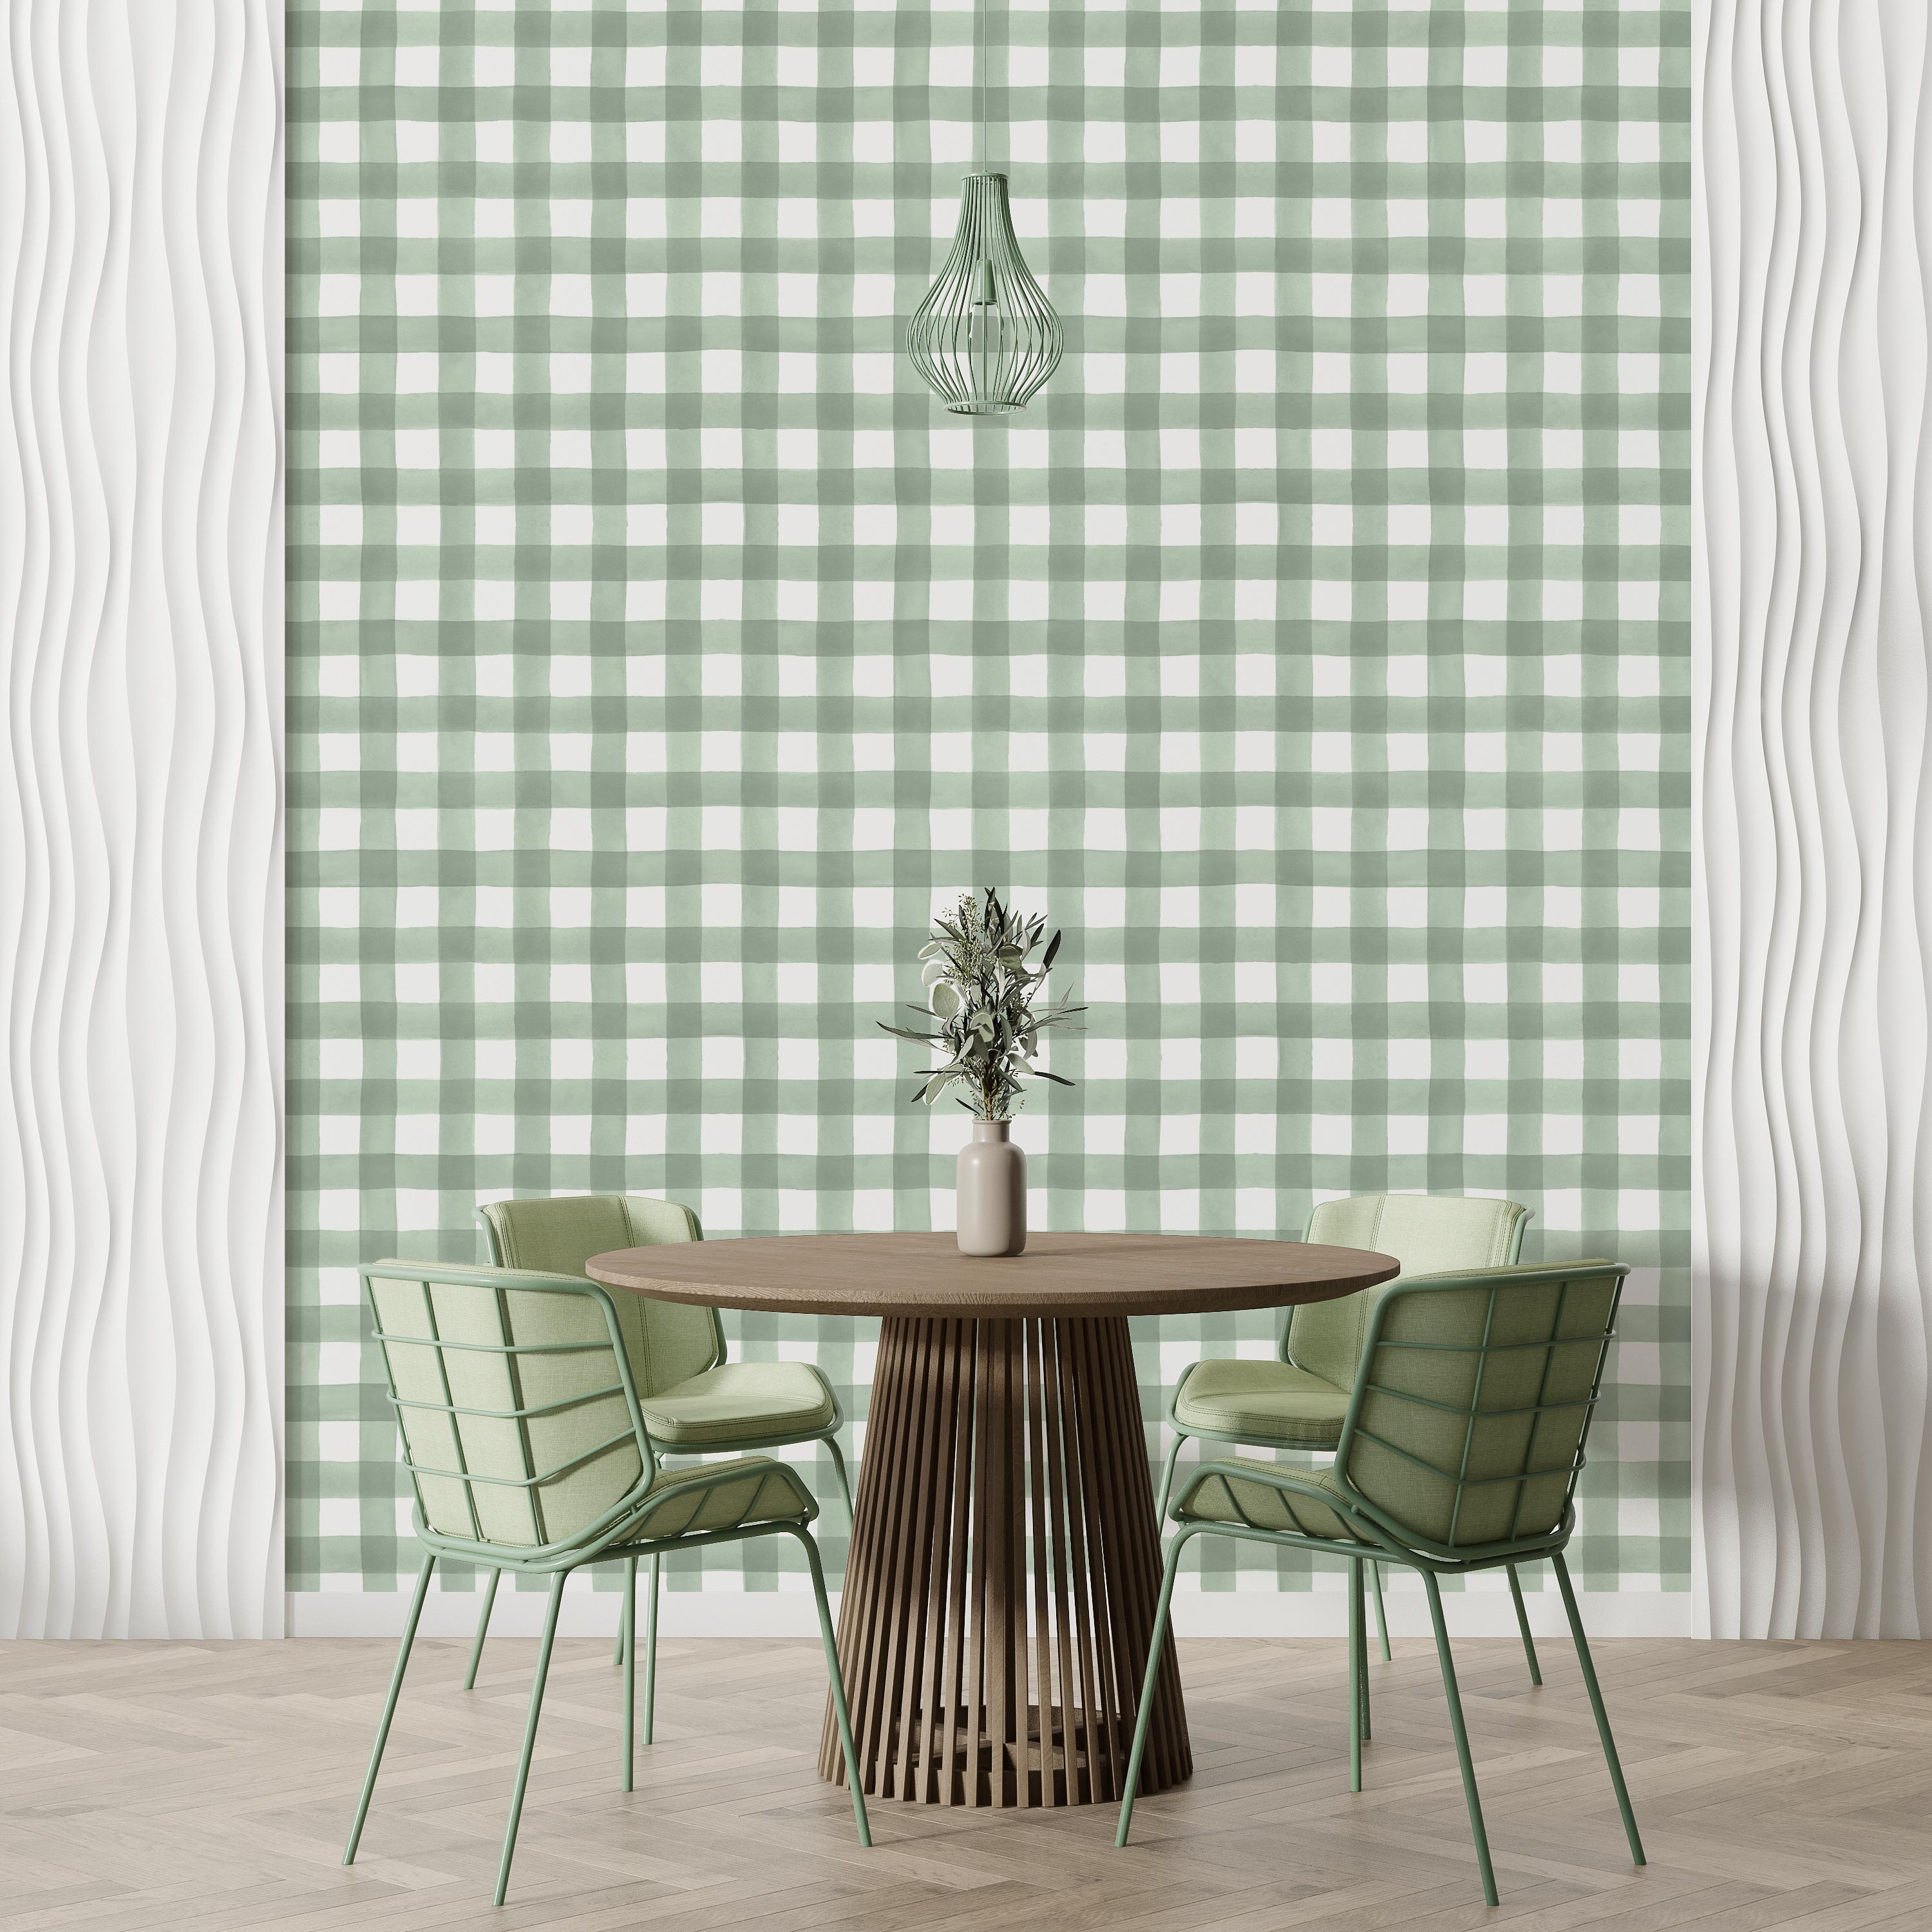 files/TransformYourDiningRoomwithOurClassicSageGreenCheckPeel-and-StickWallpaper-Elevateyourdiningroomwithourtimelesssagegreencheckwallpaper.jpg